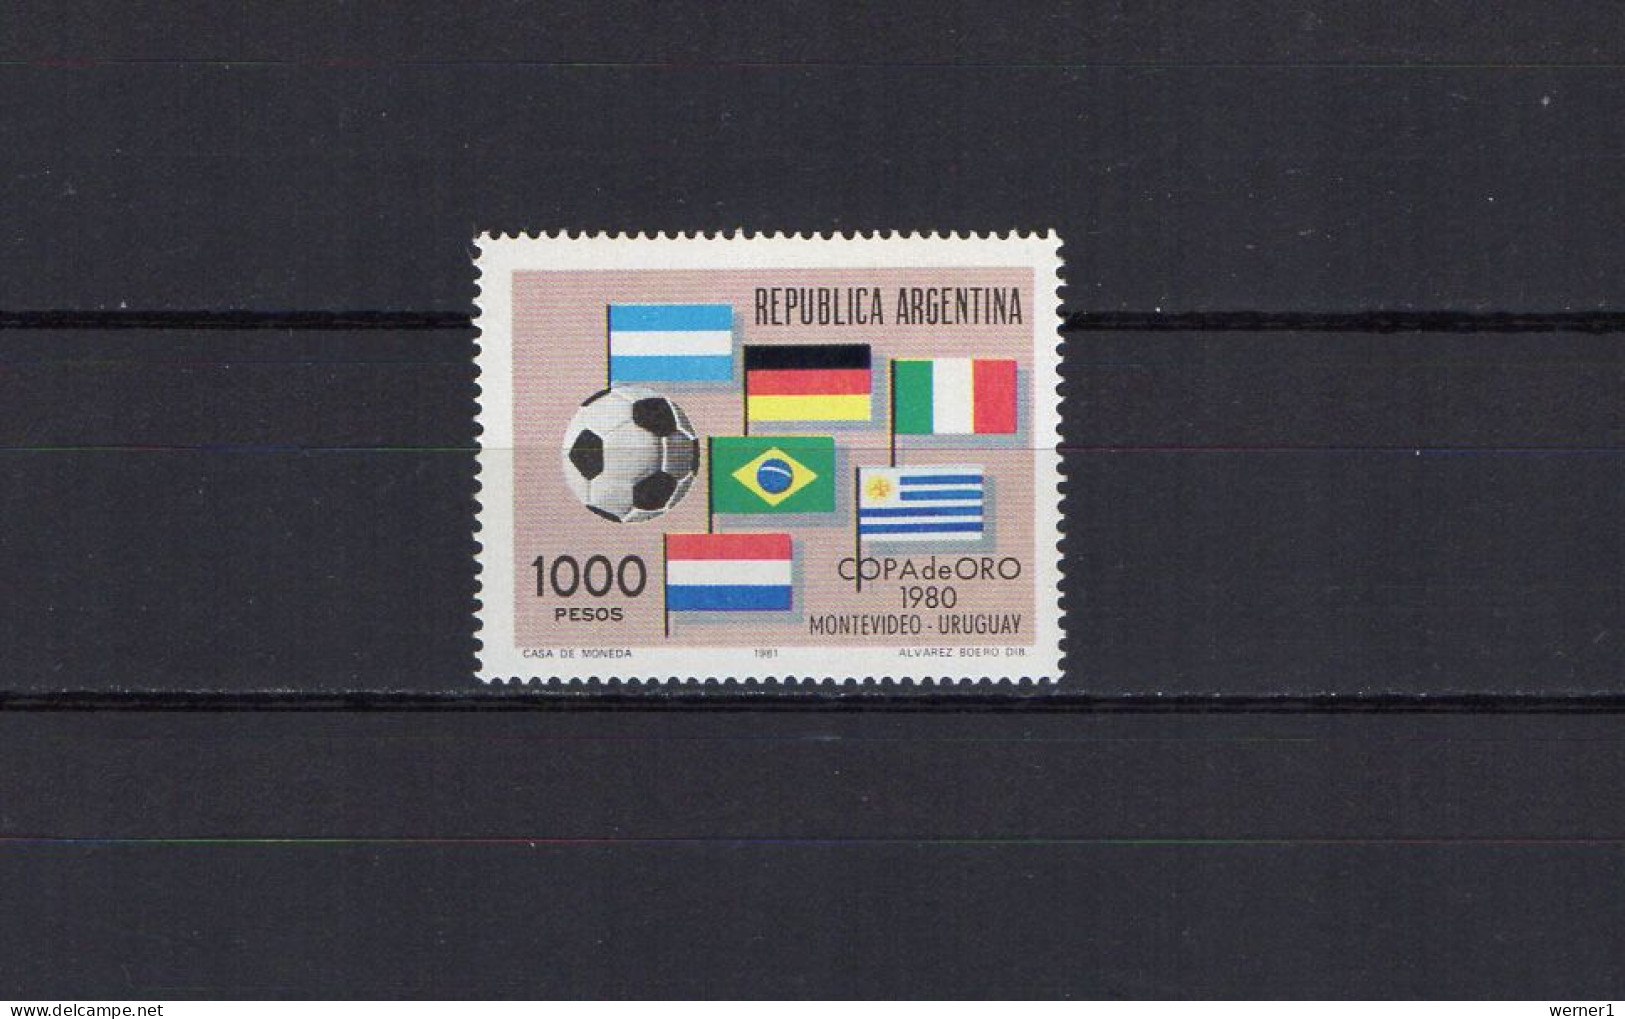 Argentina 1981 Football Soccer Gold Cup Stamp MNH - Soccer American Cup